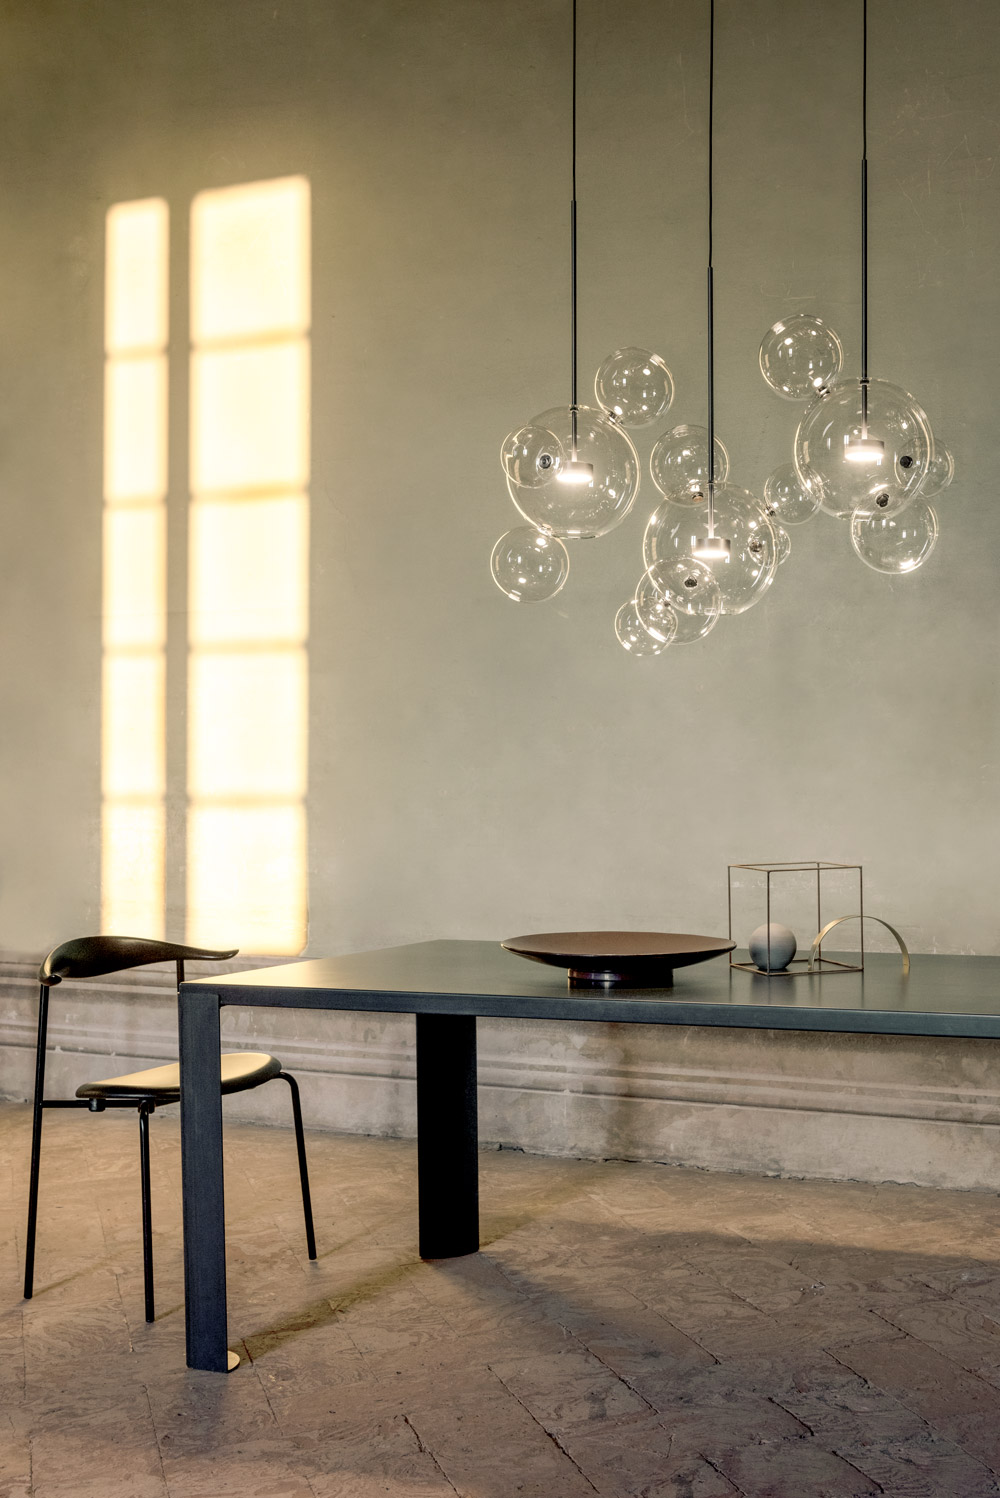 Giopato_coombes_Ph_Nathalie_Krag_2019_Bolle-Chandelier-14L_01_low.jpg